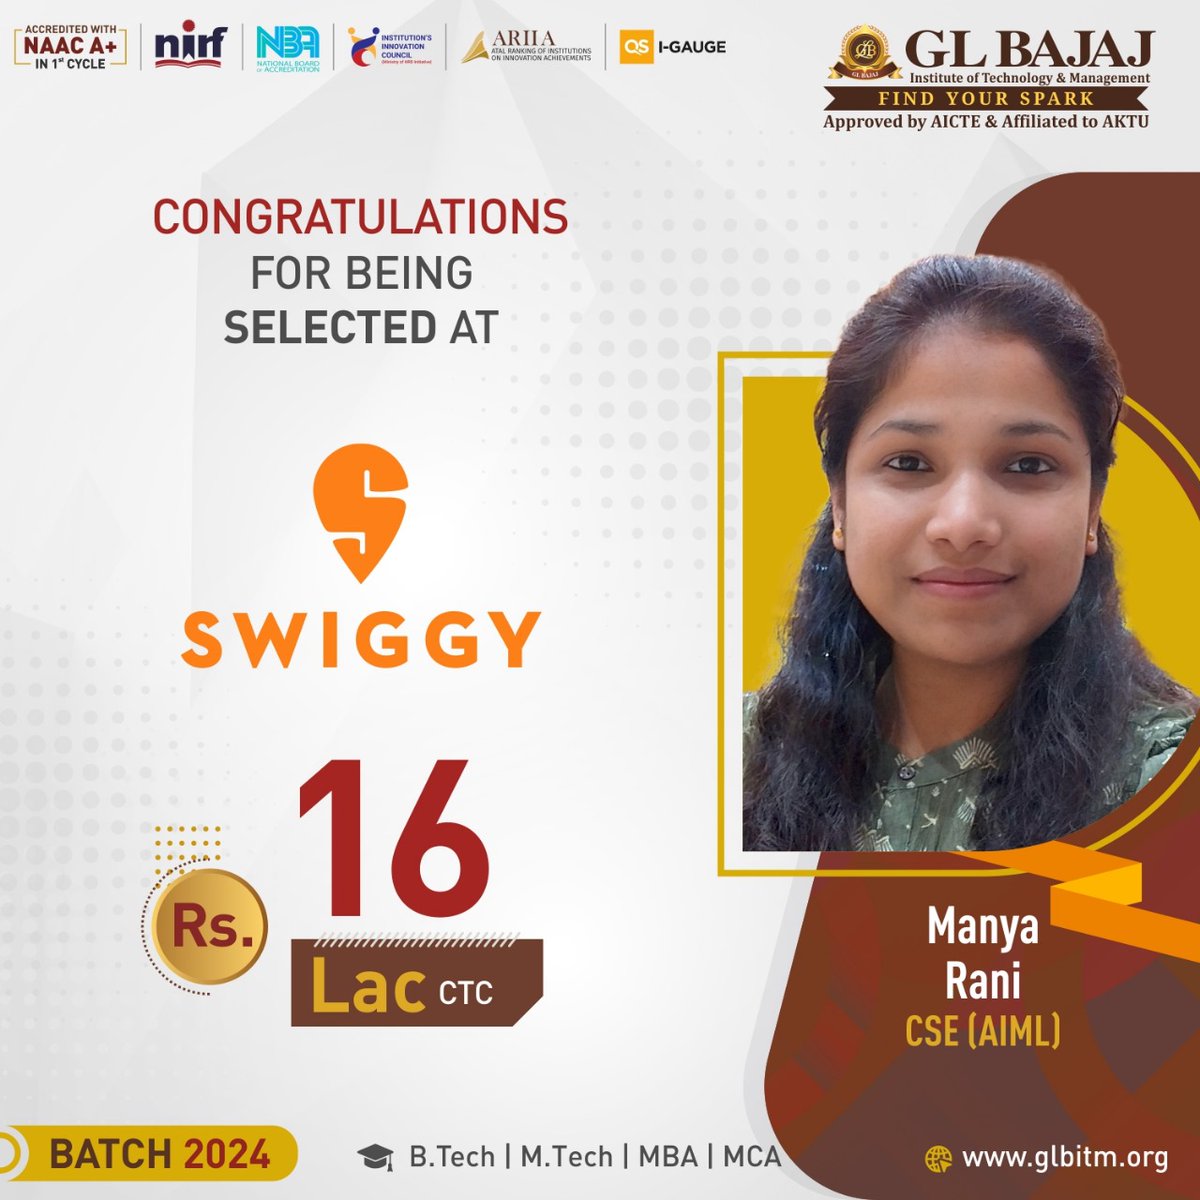 An outstanding student of #CSE (#AIML)Manya Rani, Batch 2024 of #GLBajaj (#GLBITM) has secured an incredible #Placement from campus recruitment at @Swiggy at a #Dreampackage of Rs. 16 Lac CTC. 

#campusplacement #studentplacement #BEaGLBian #topBtechcollege #placement2024